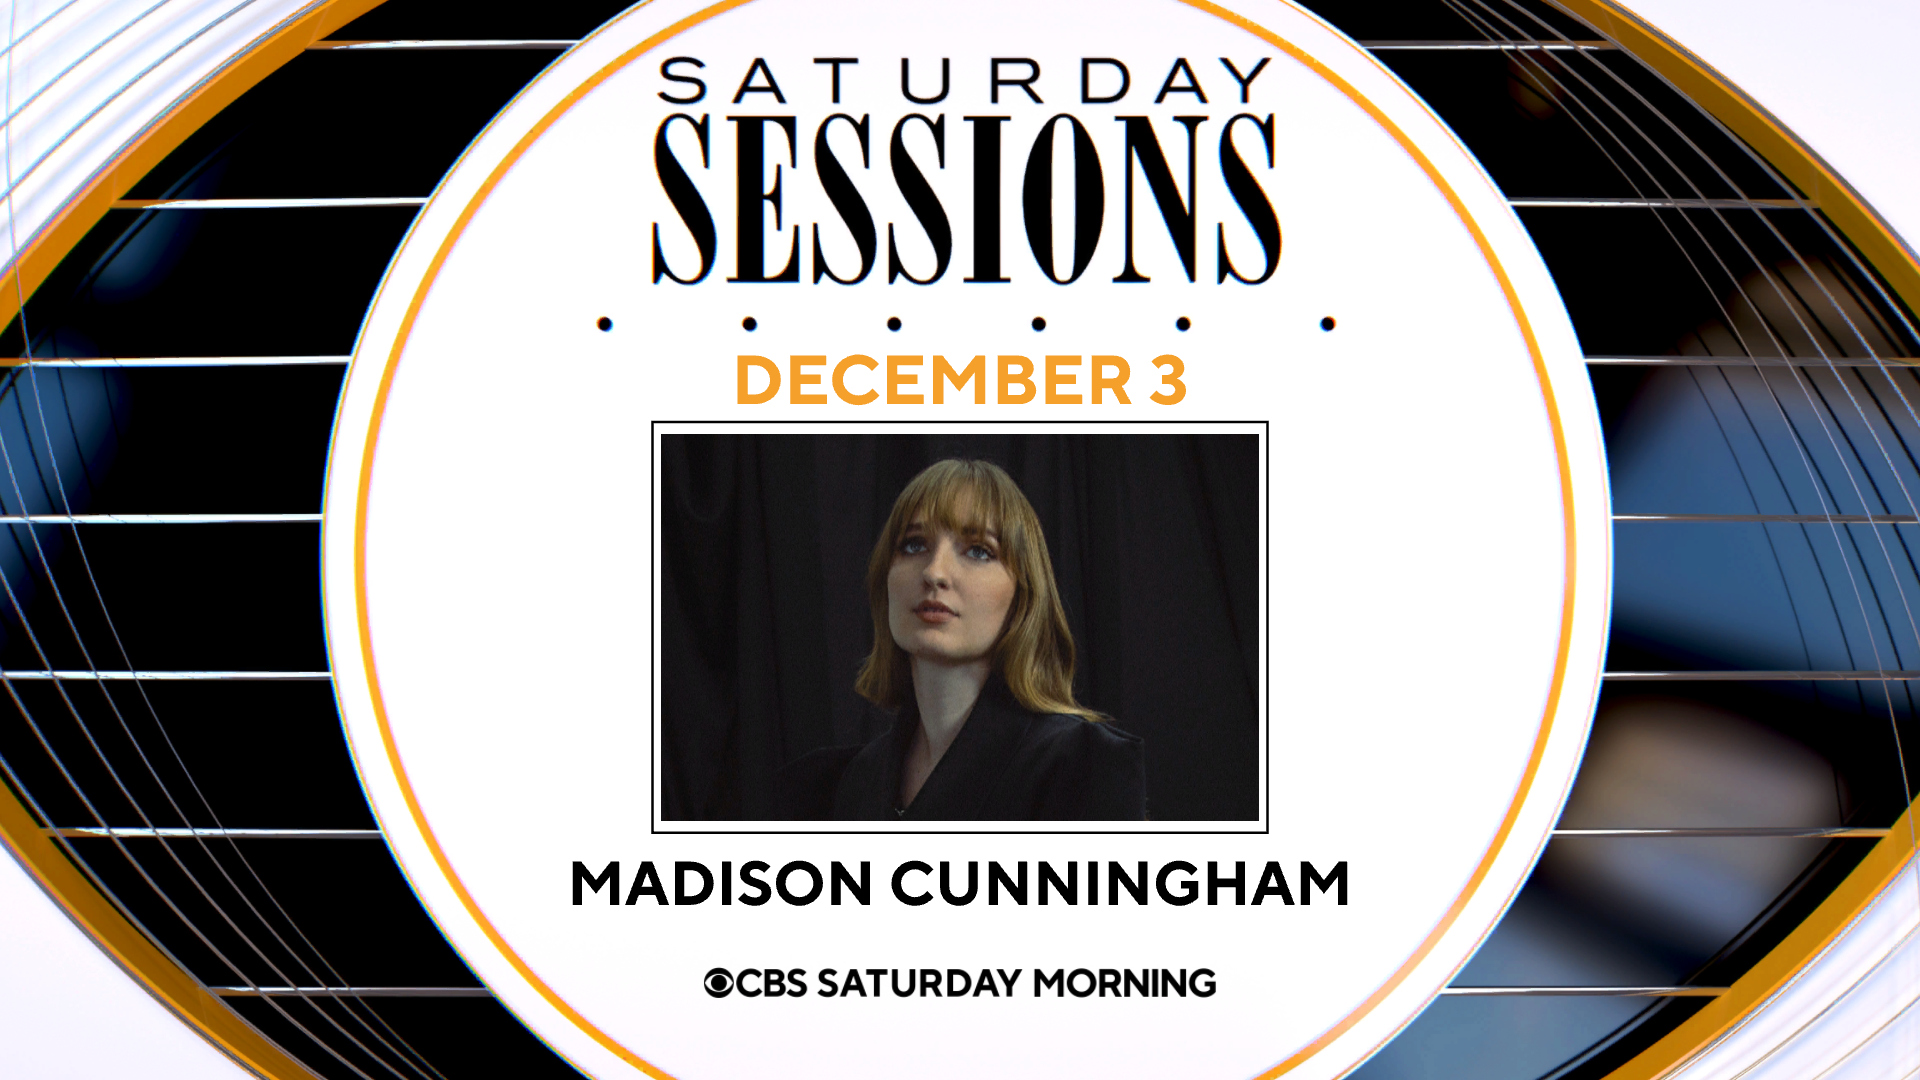 Madison Cunningham performs on "CBS Saturday Morning: Saturday Sessions," nominated for two Grammy Awards